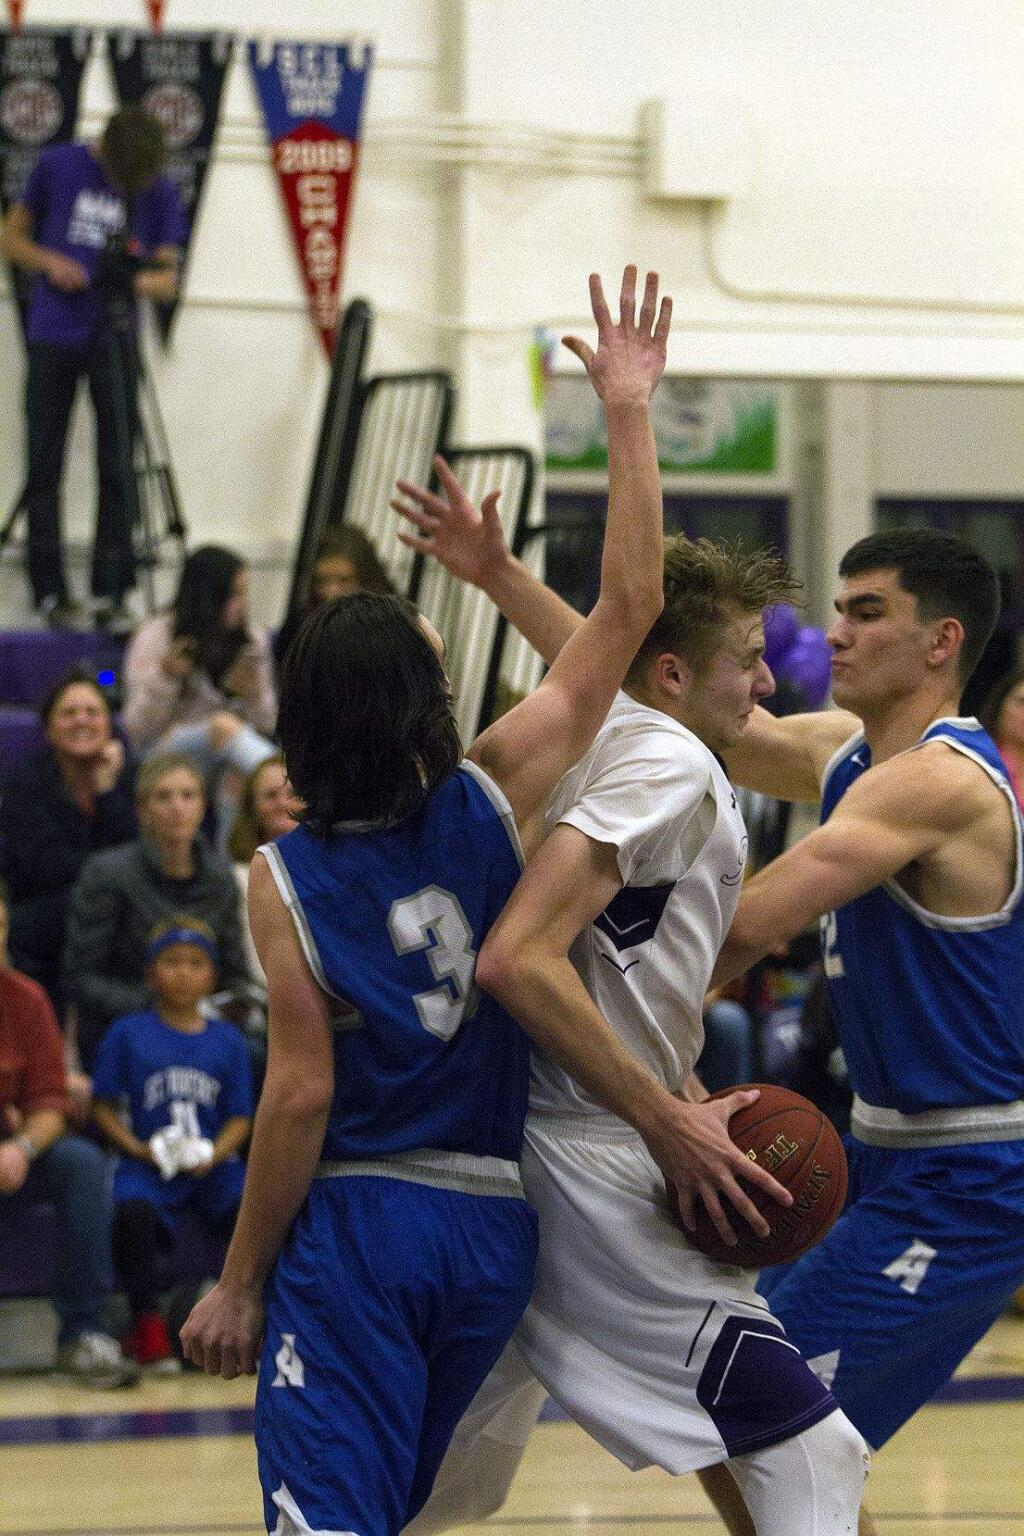 DWIGHT SUGIOKA/FOR THE ARGUS-COURIERPetaluma was squeezed by an agressive Analy defense and lost on Senior Night, 62-46.